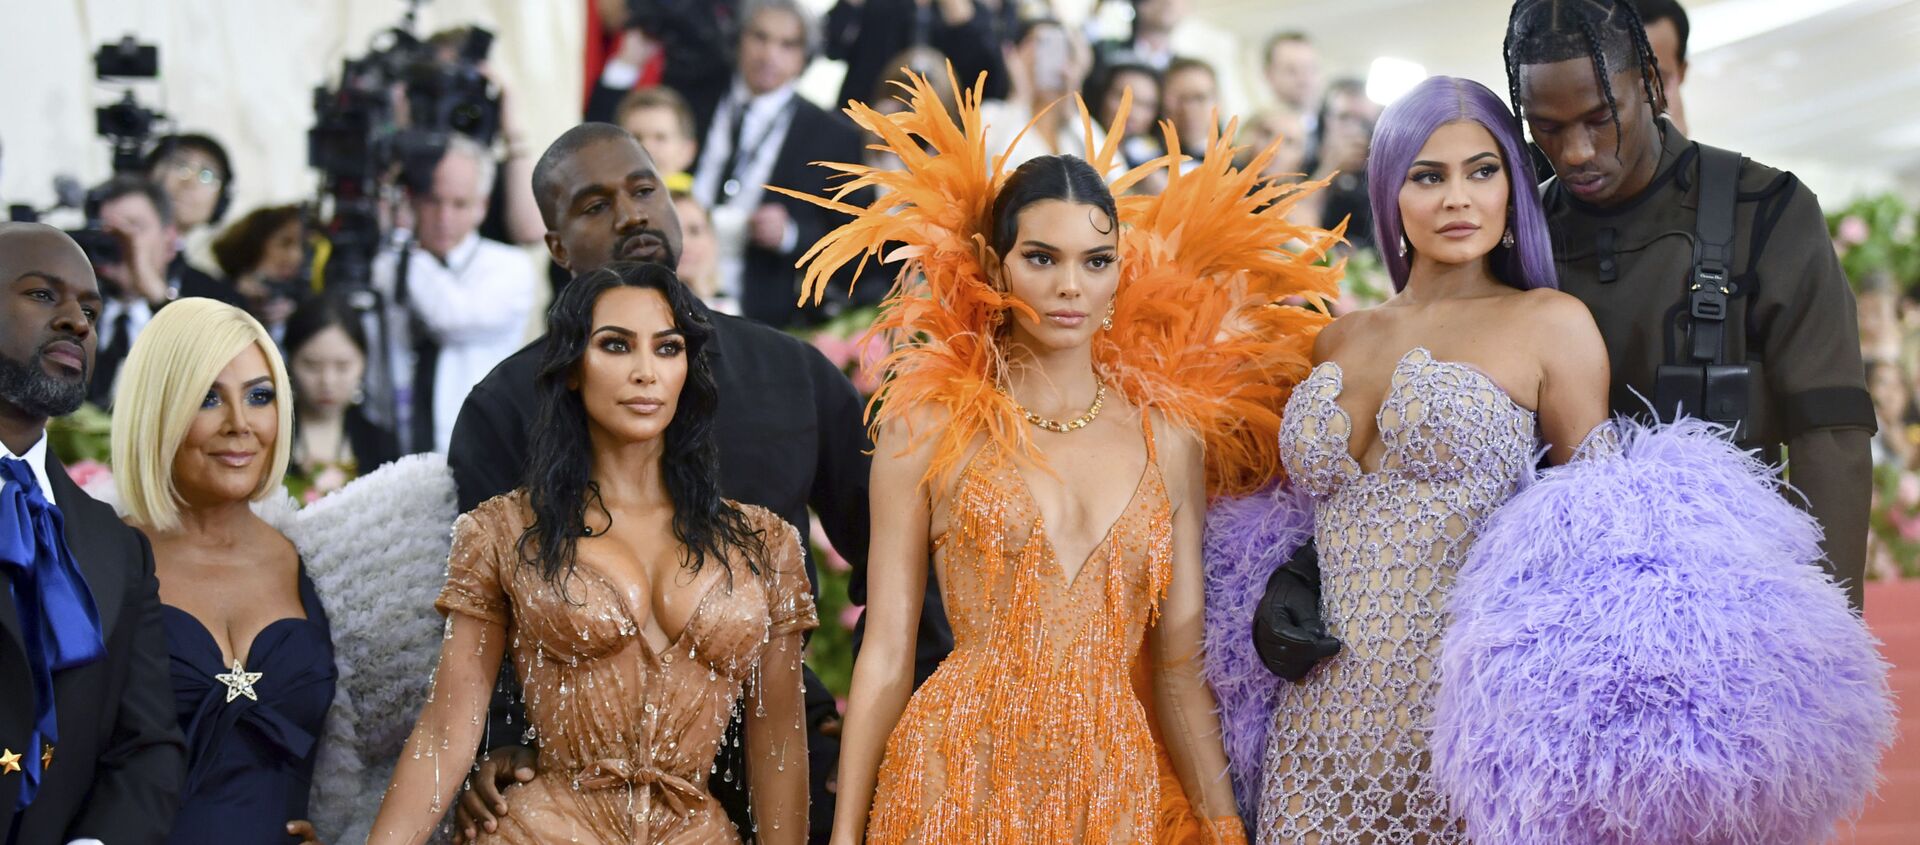 Corey Gamble, from left, Kris Jenner, Kim Kardashian, Kanye West, Kendall Jenner, Kylie Jenner and Travis Scott attend The Metropolitan Museum of Art's Costume Institute benefit gala celebrating the opening of the Camp: Notes on Fashion exhibition on Monday, May 6, 2019, in New York. - Sputnik International, 1920, 13.02.2021